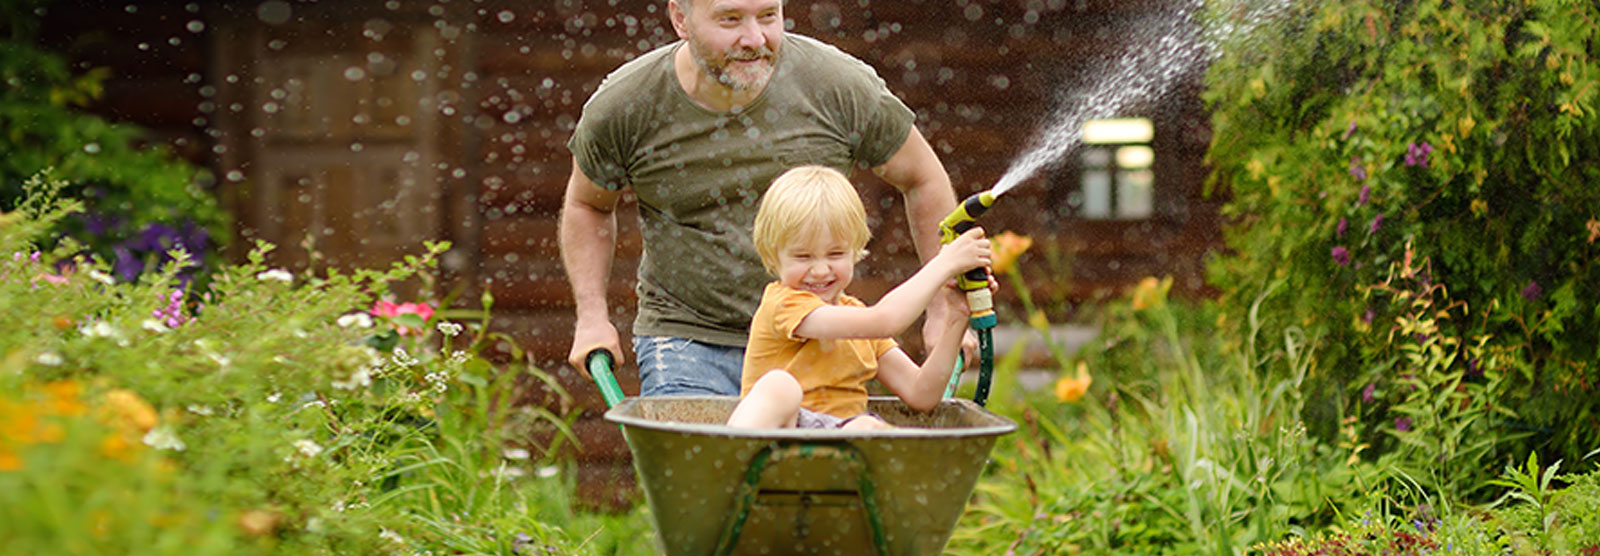 Dad and little boy playing in wheel barrow with water hose in garden.